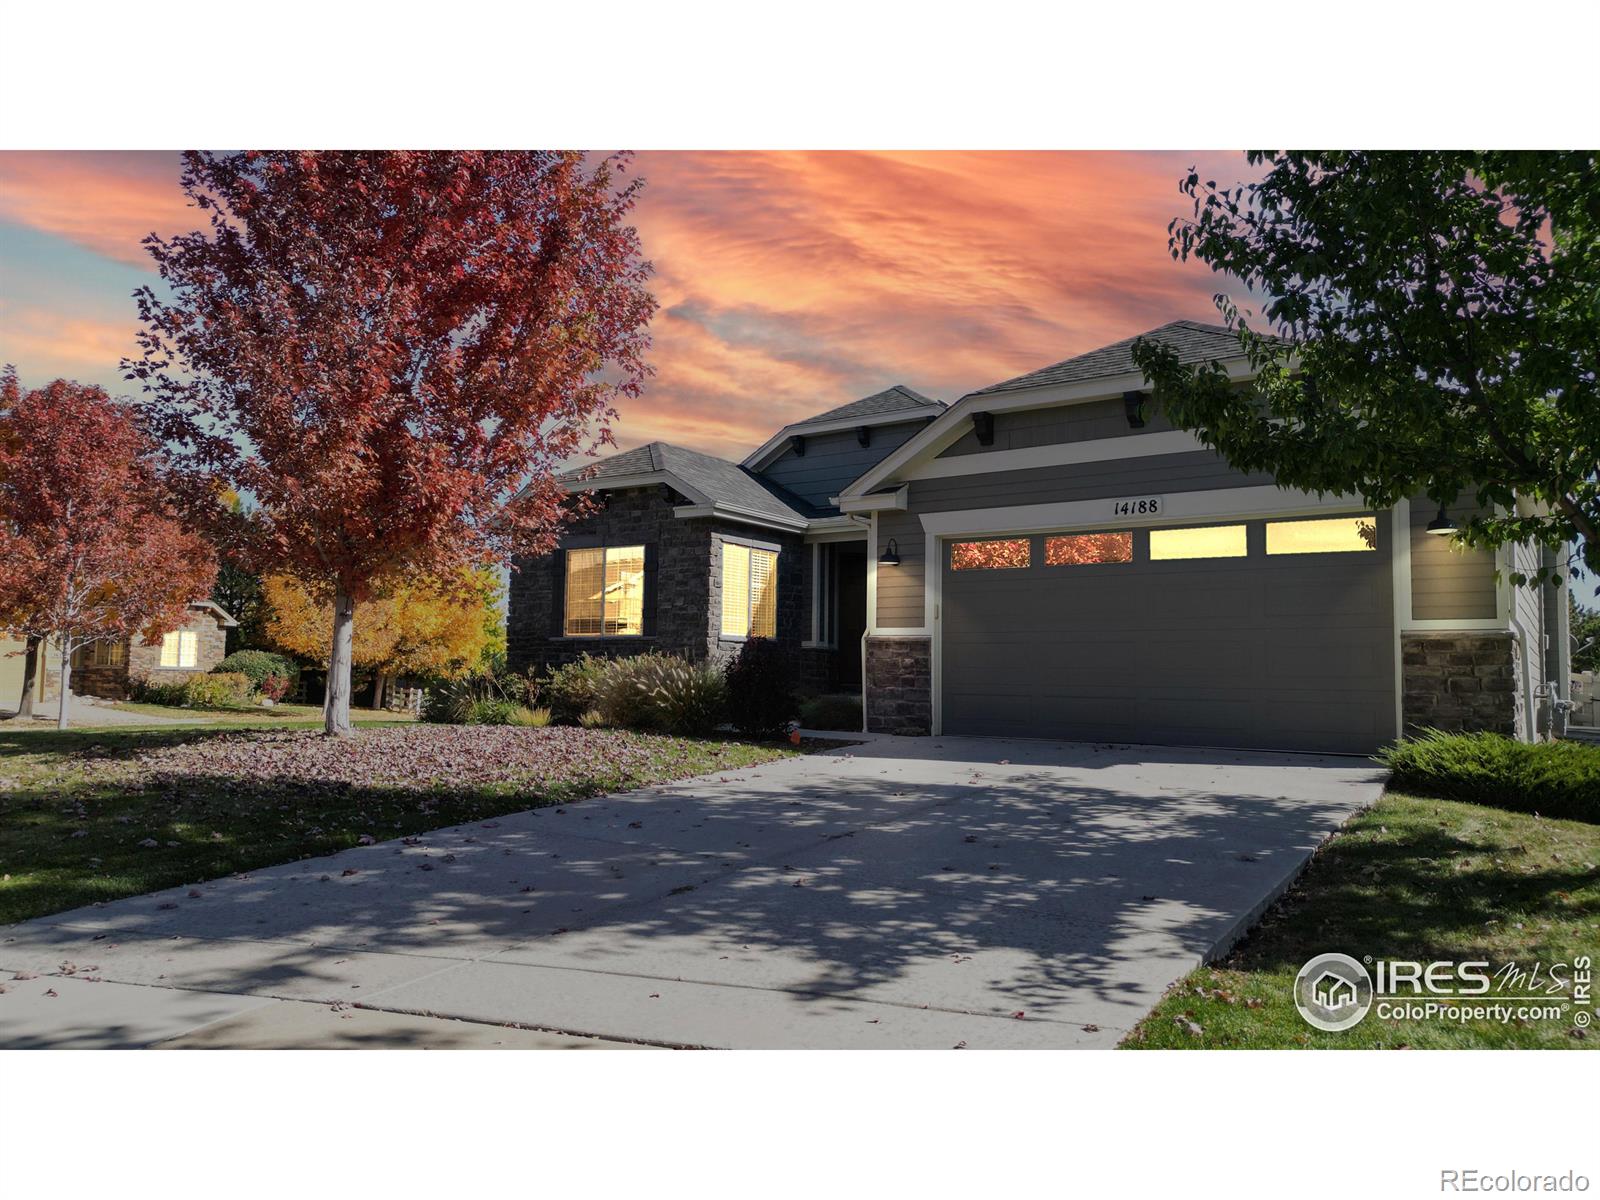 14188  davies way, Broomfield sold home. Closed on 2024-02-06 for $782,000.